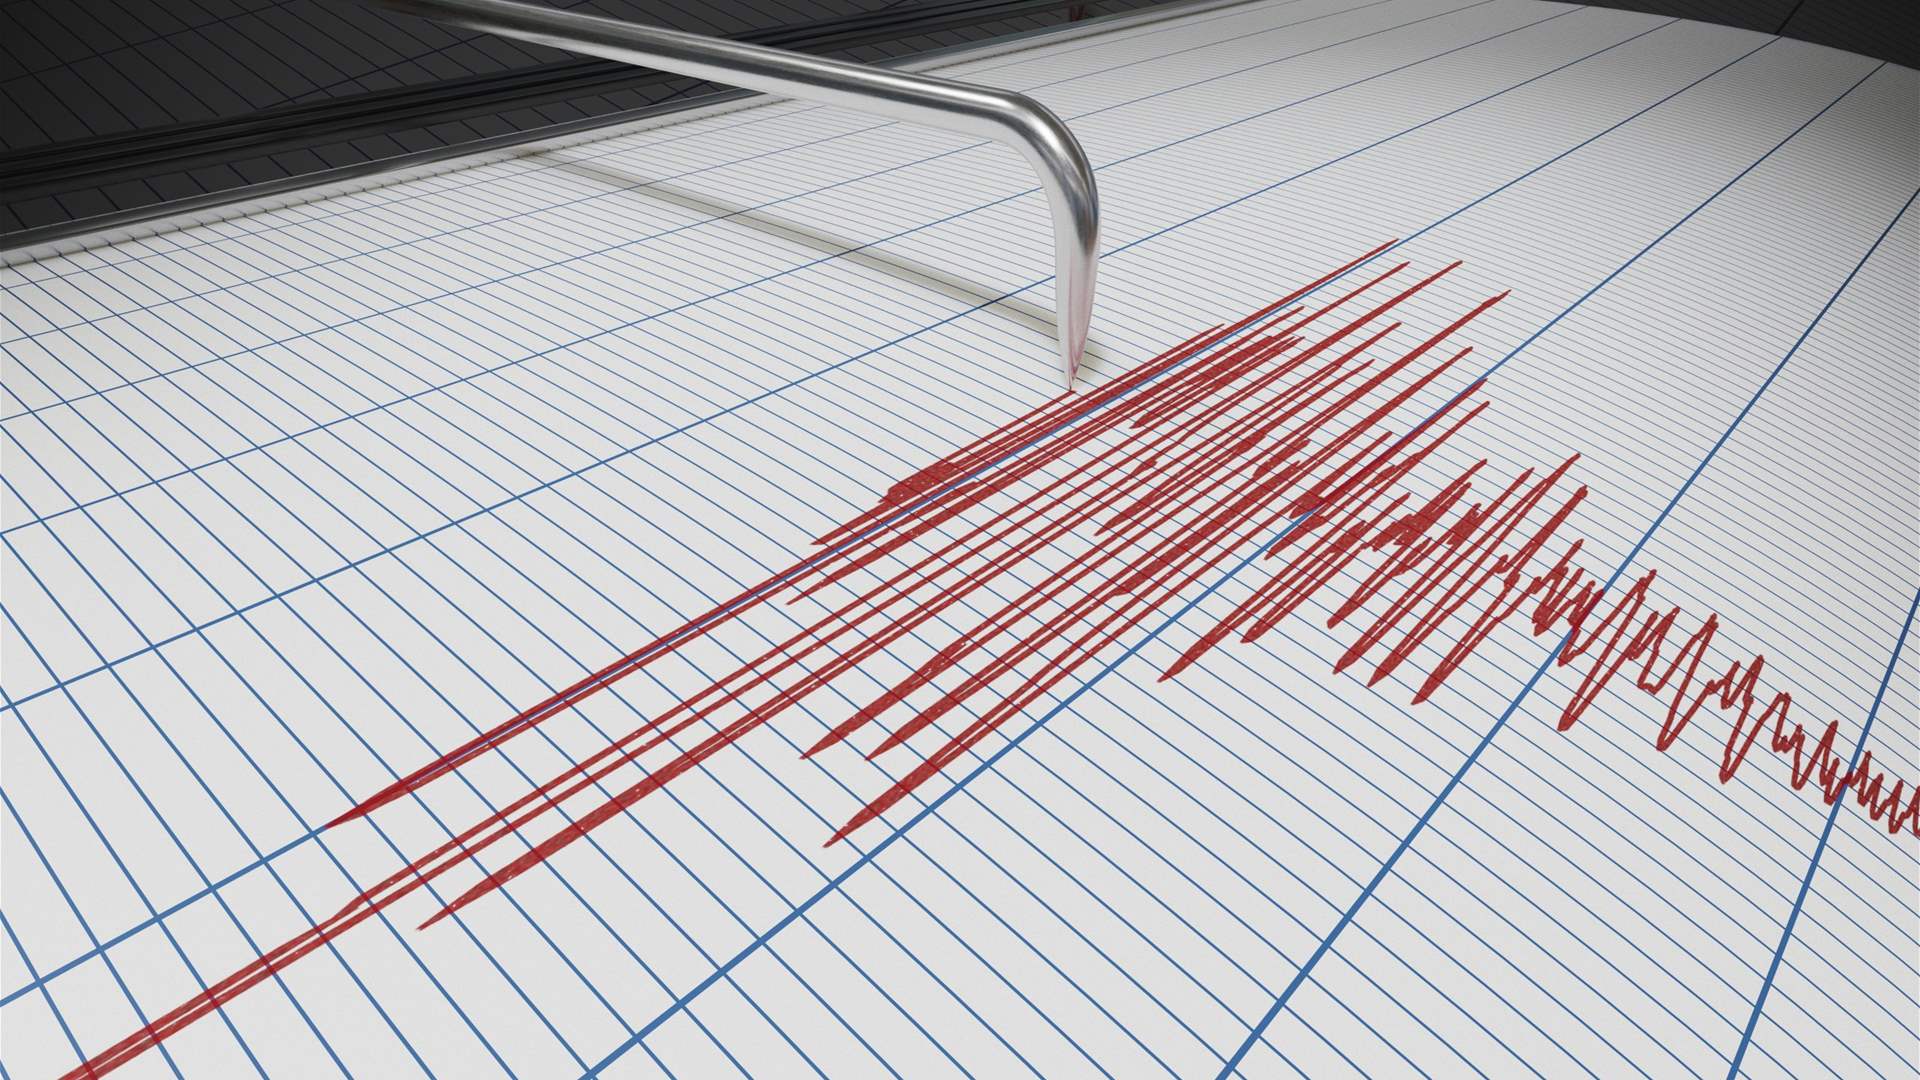 Earthquake hits southern Italy, no immediate damage reported